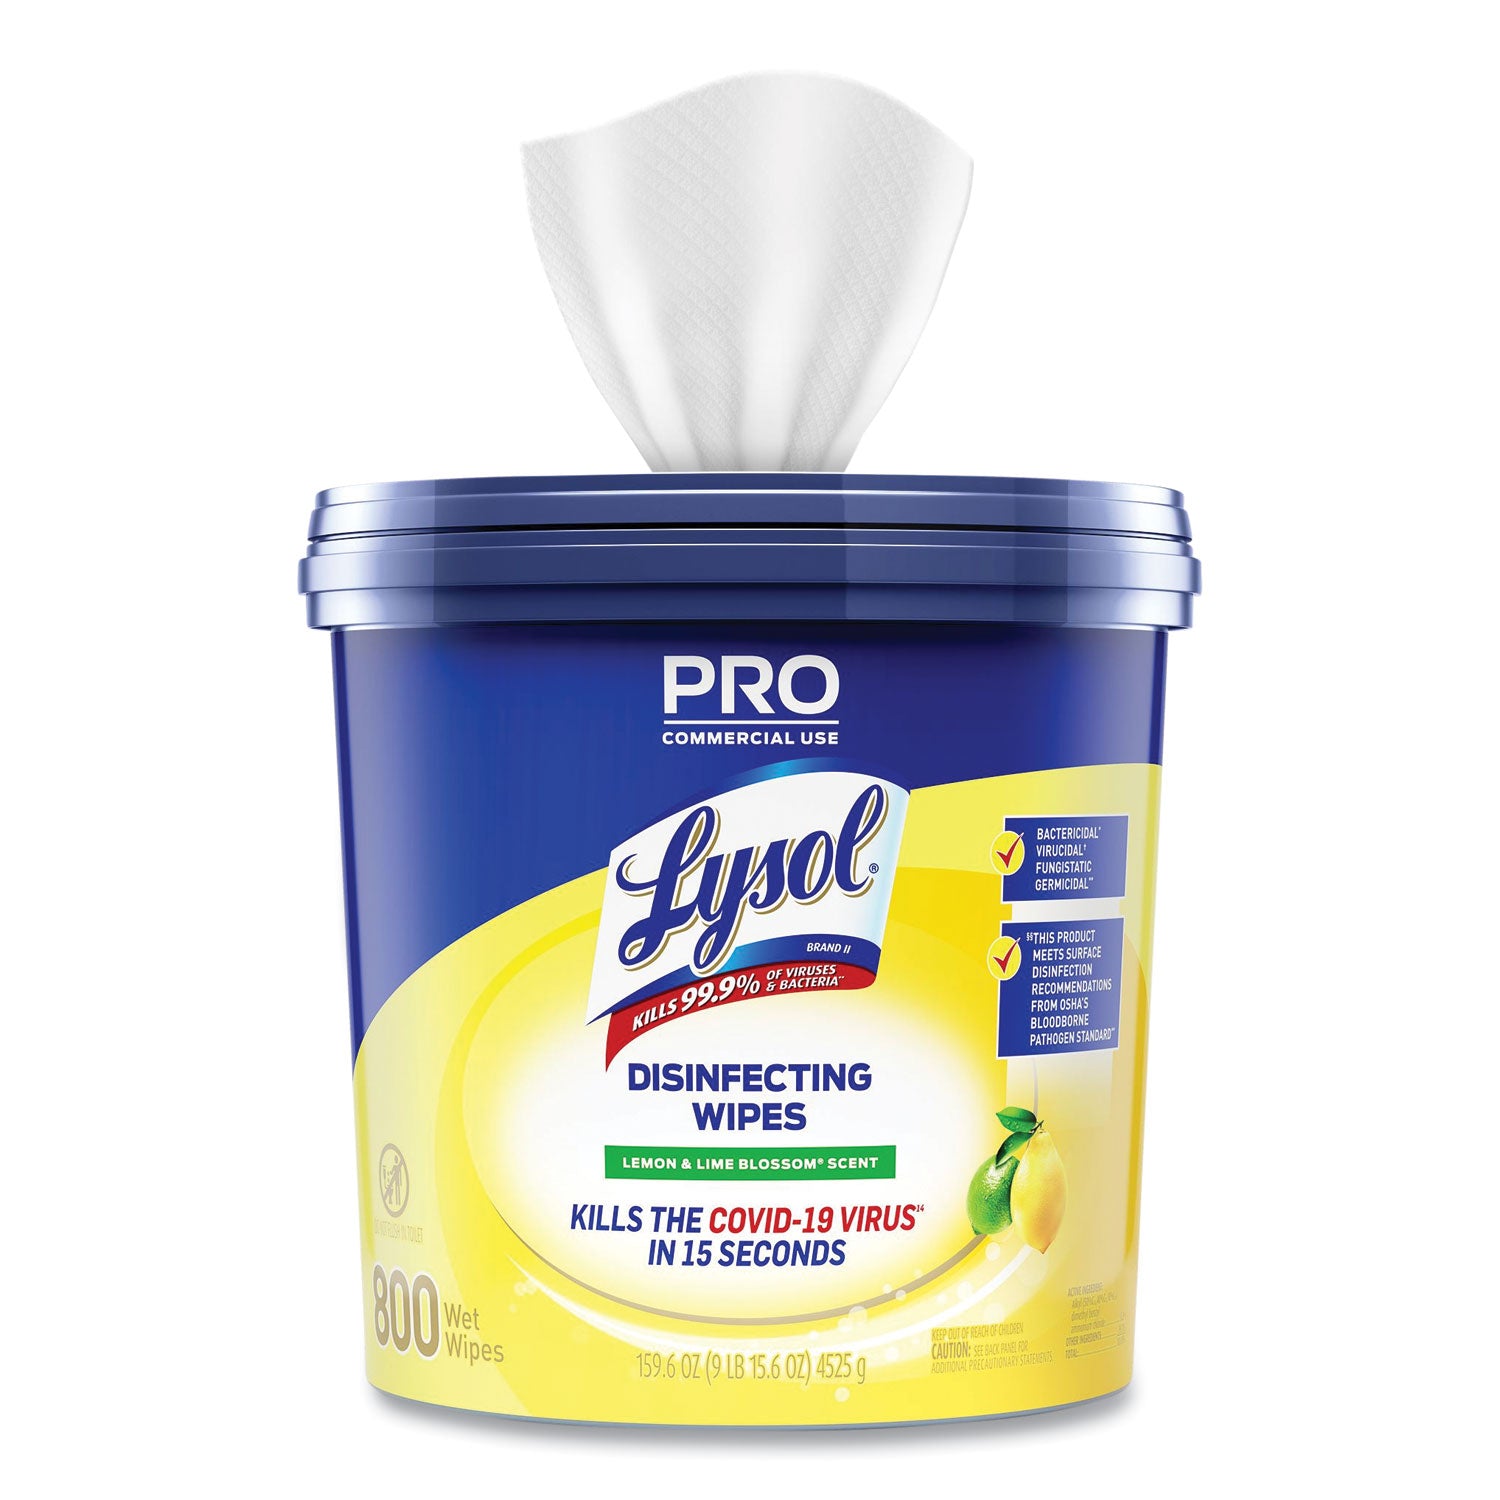 professional-disinfecting-wipe-bucket-1-ply-6-x-8-lemon-and-lime-blossom-white-800-wipes_rac99856ea - 2